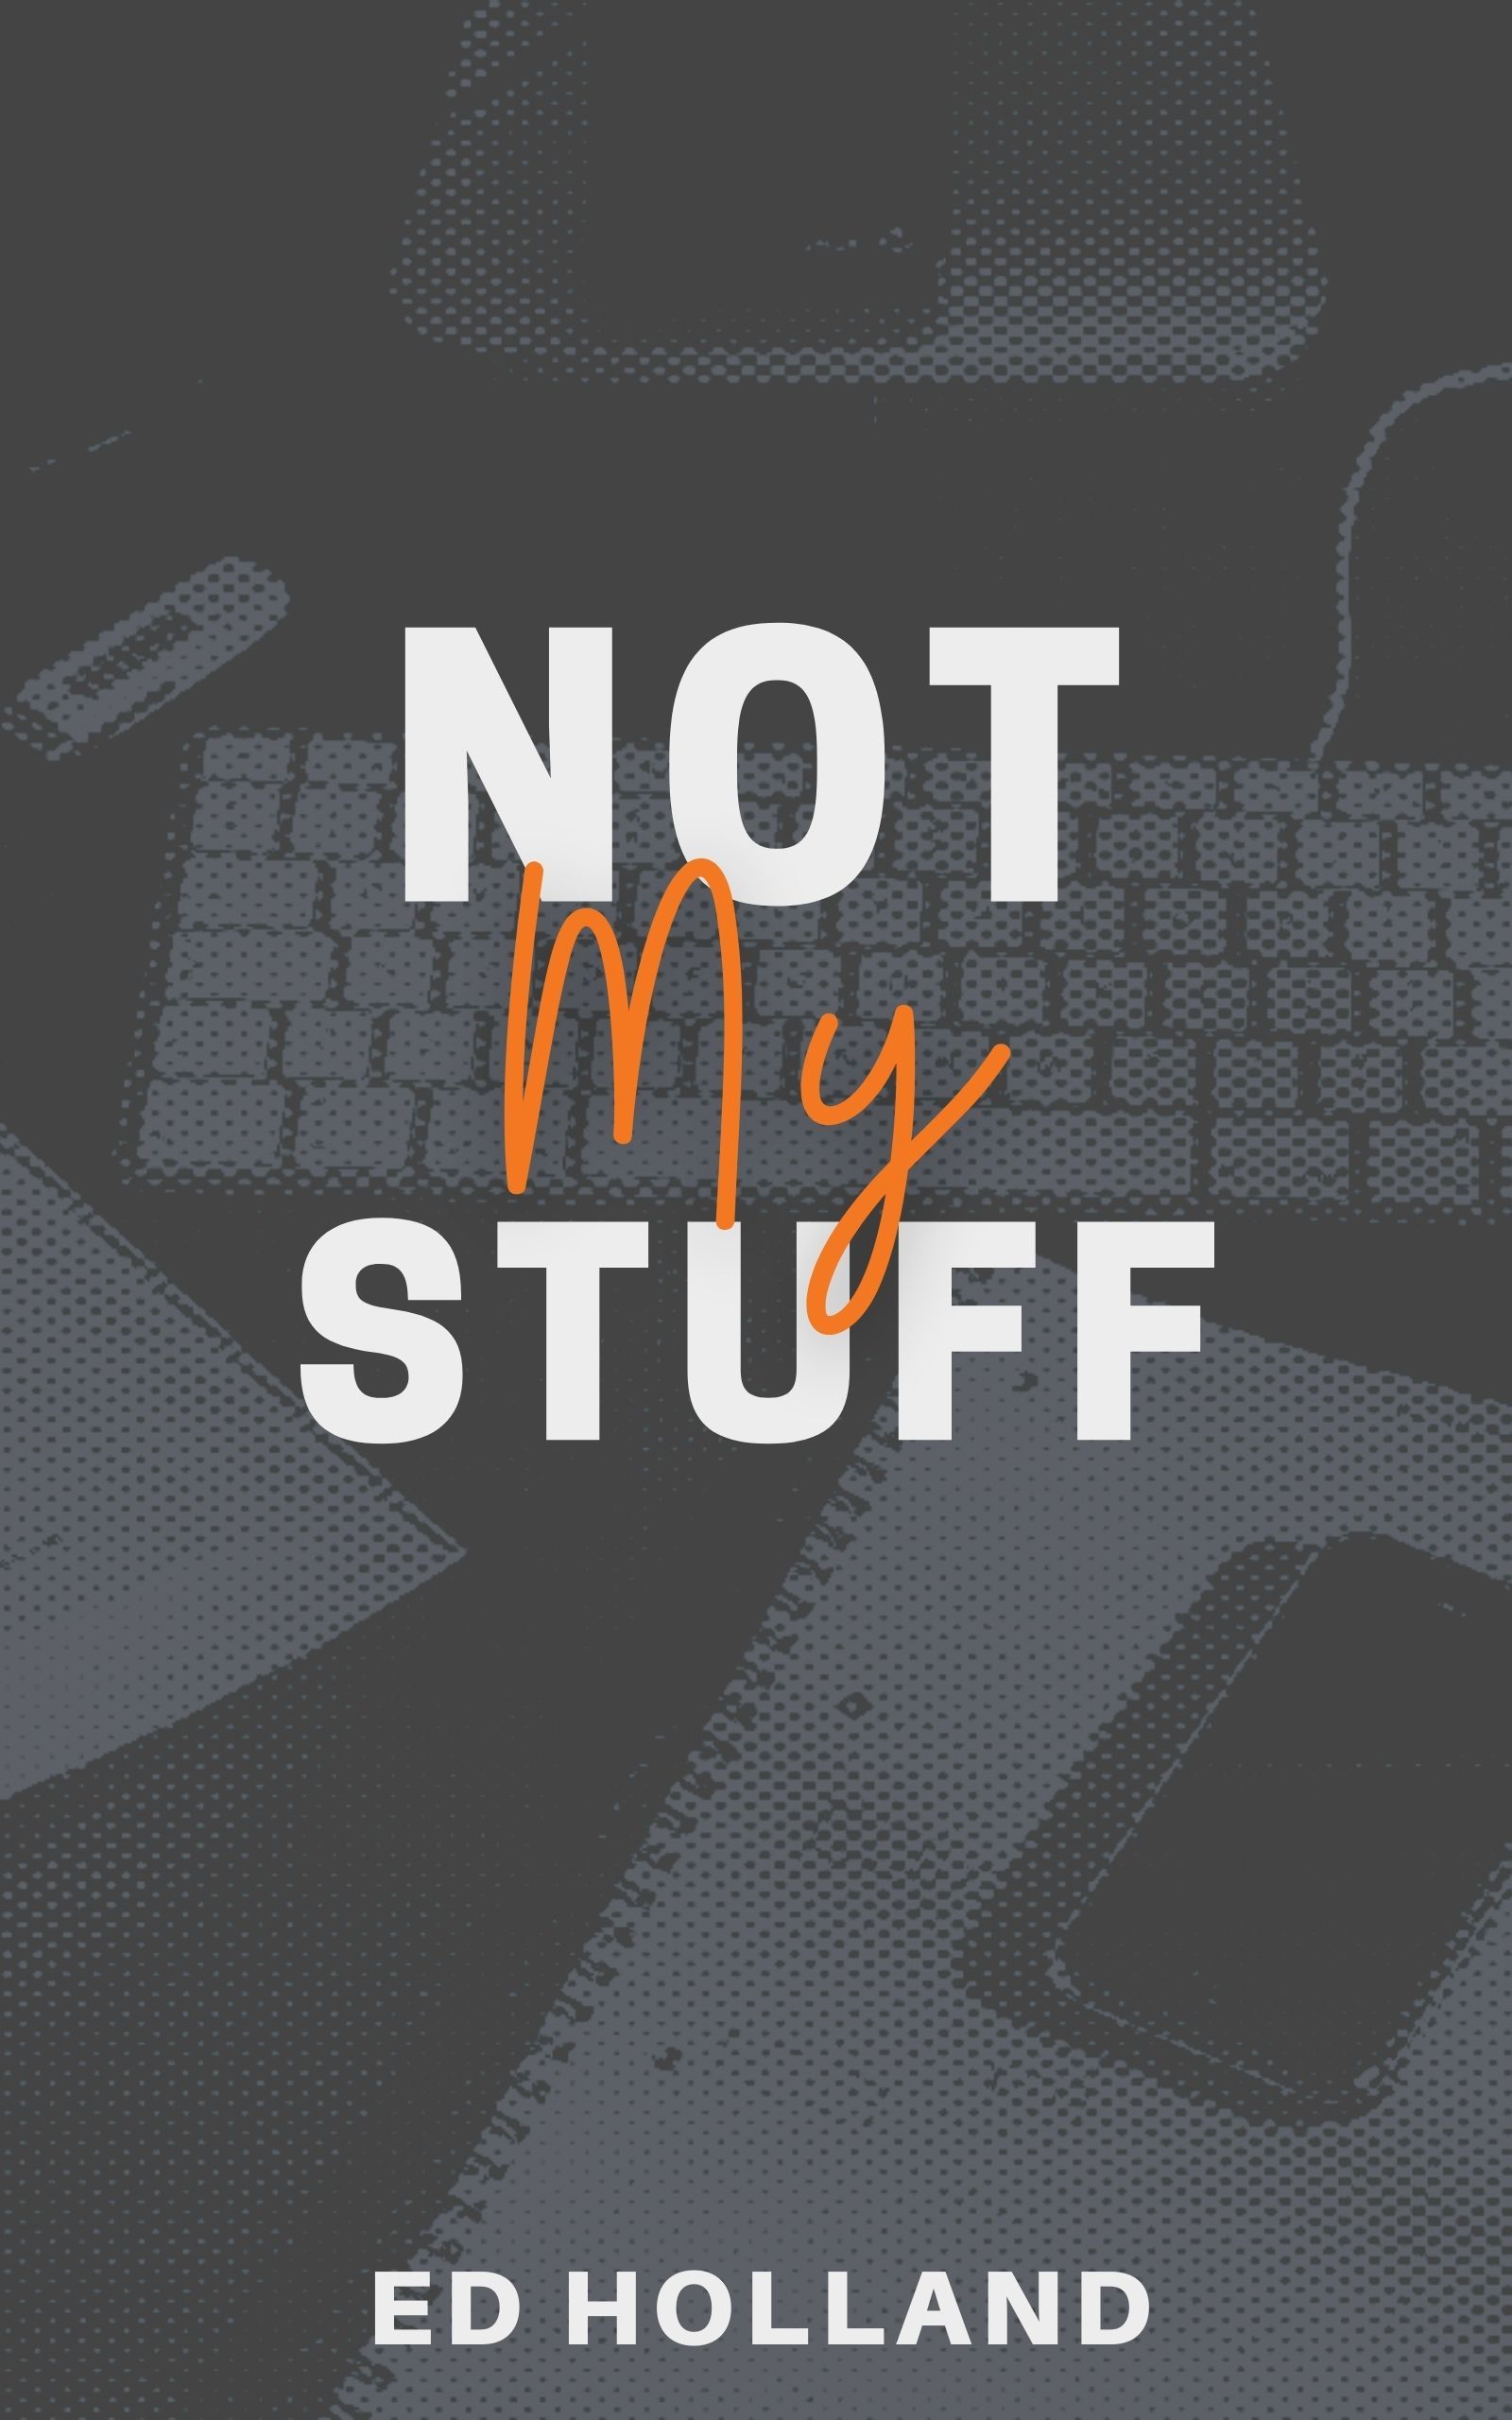 Not my stuff by Ed Holland book cover